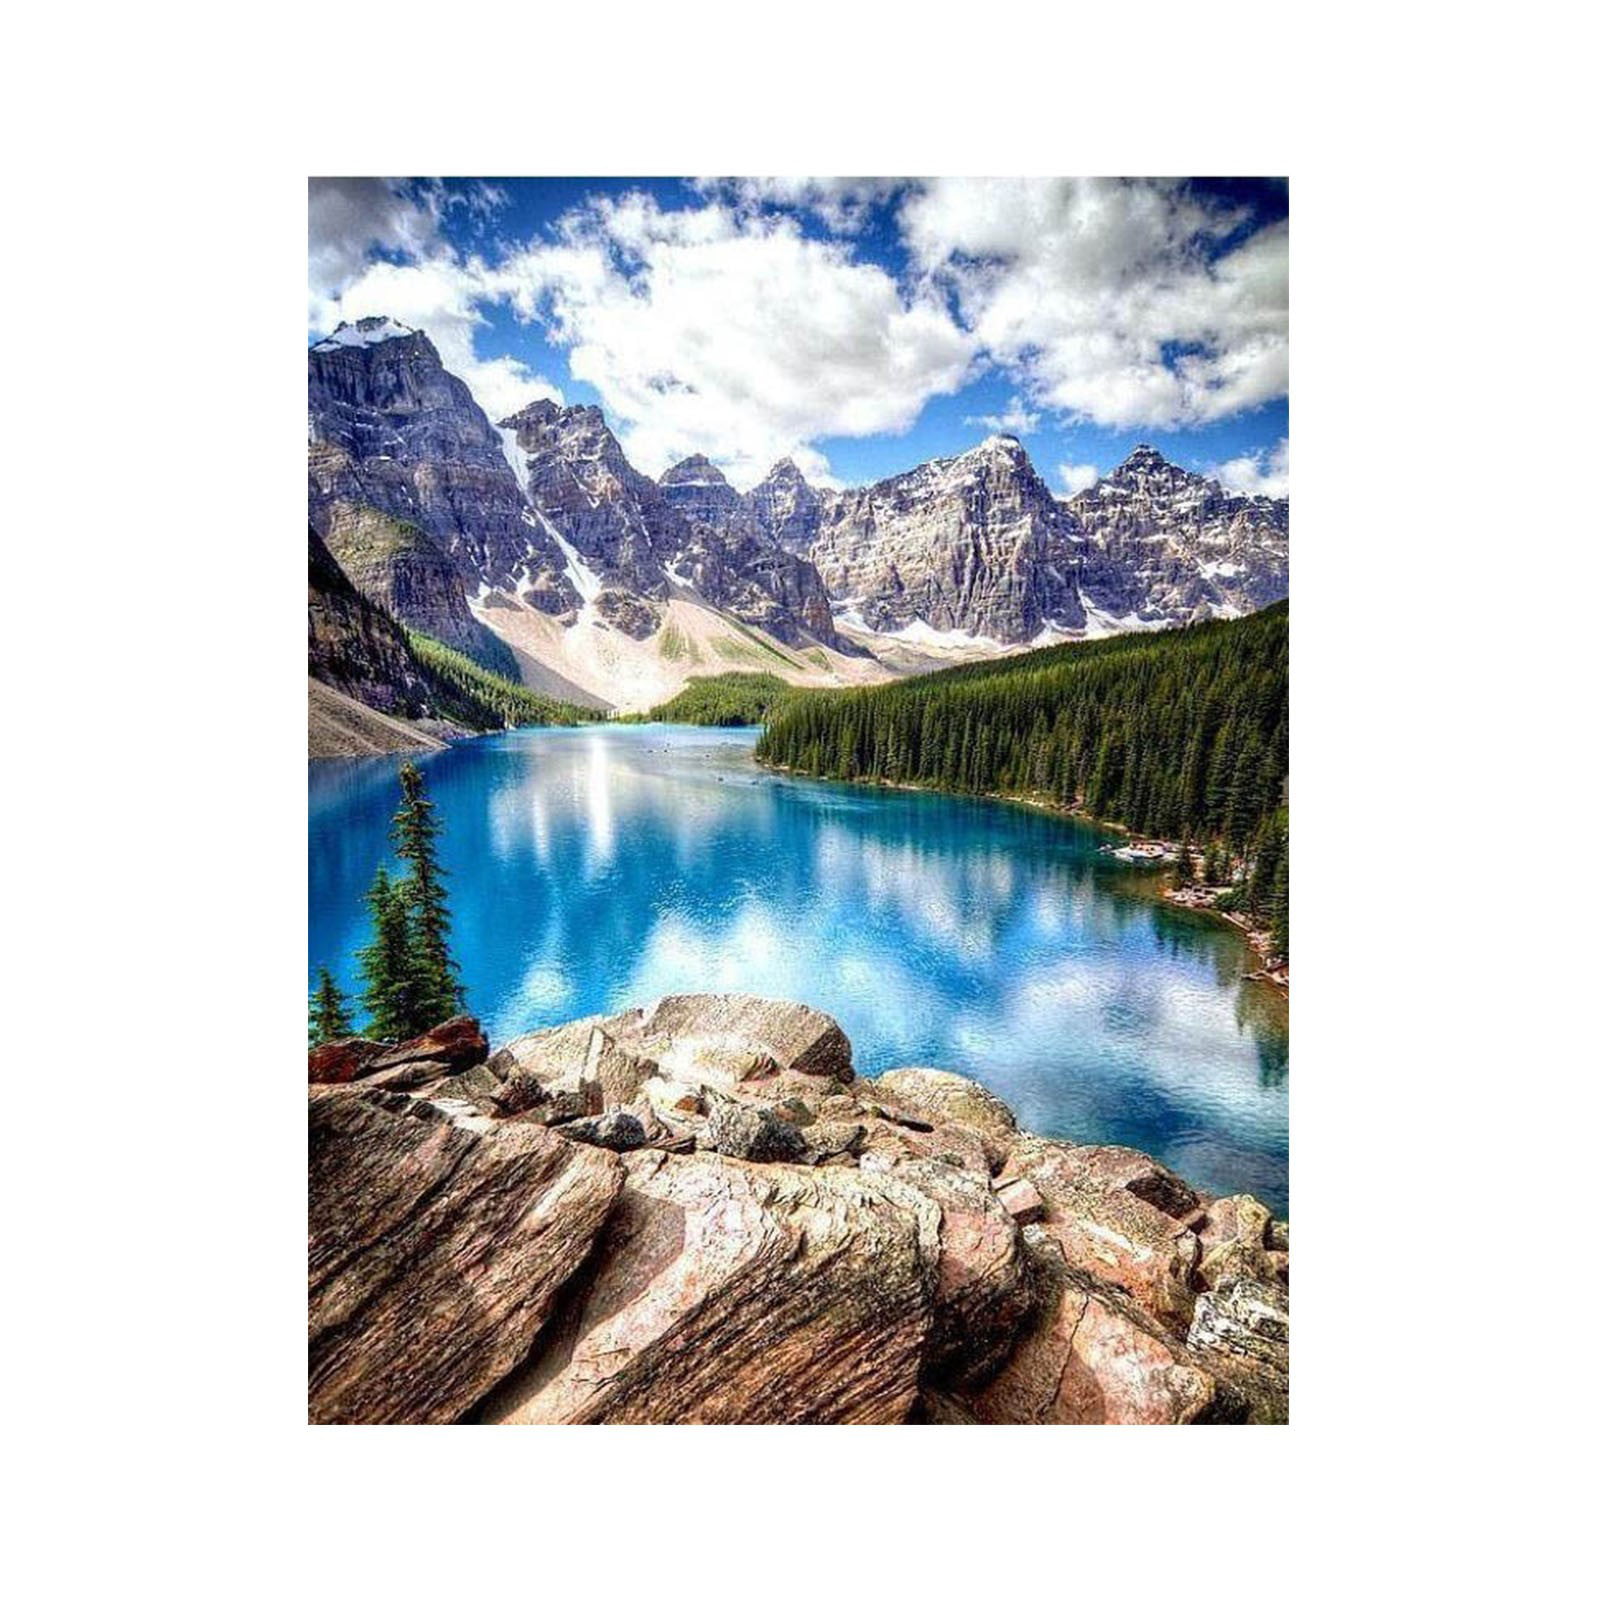 Rhinestone Painting Set Embroidery Art Craft Home Decoration Landscape Series 16X12inch LIK 5D Diamond Painting Full Drill Snow Mountains and Rivers Landscape by Number Kits for Adults 